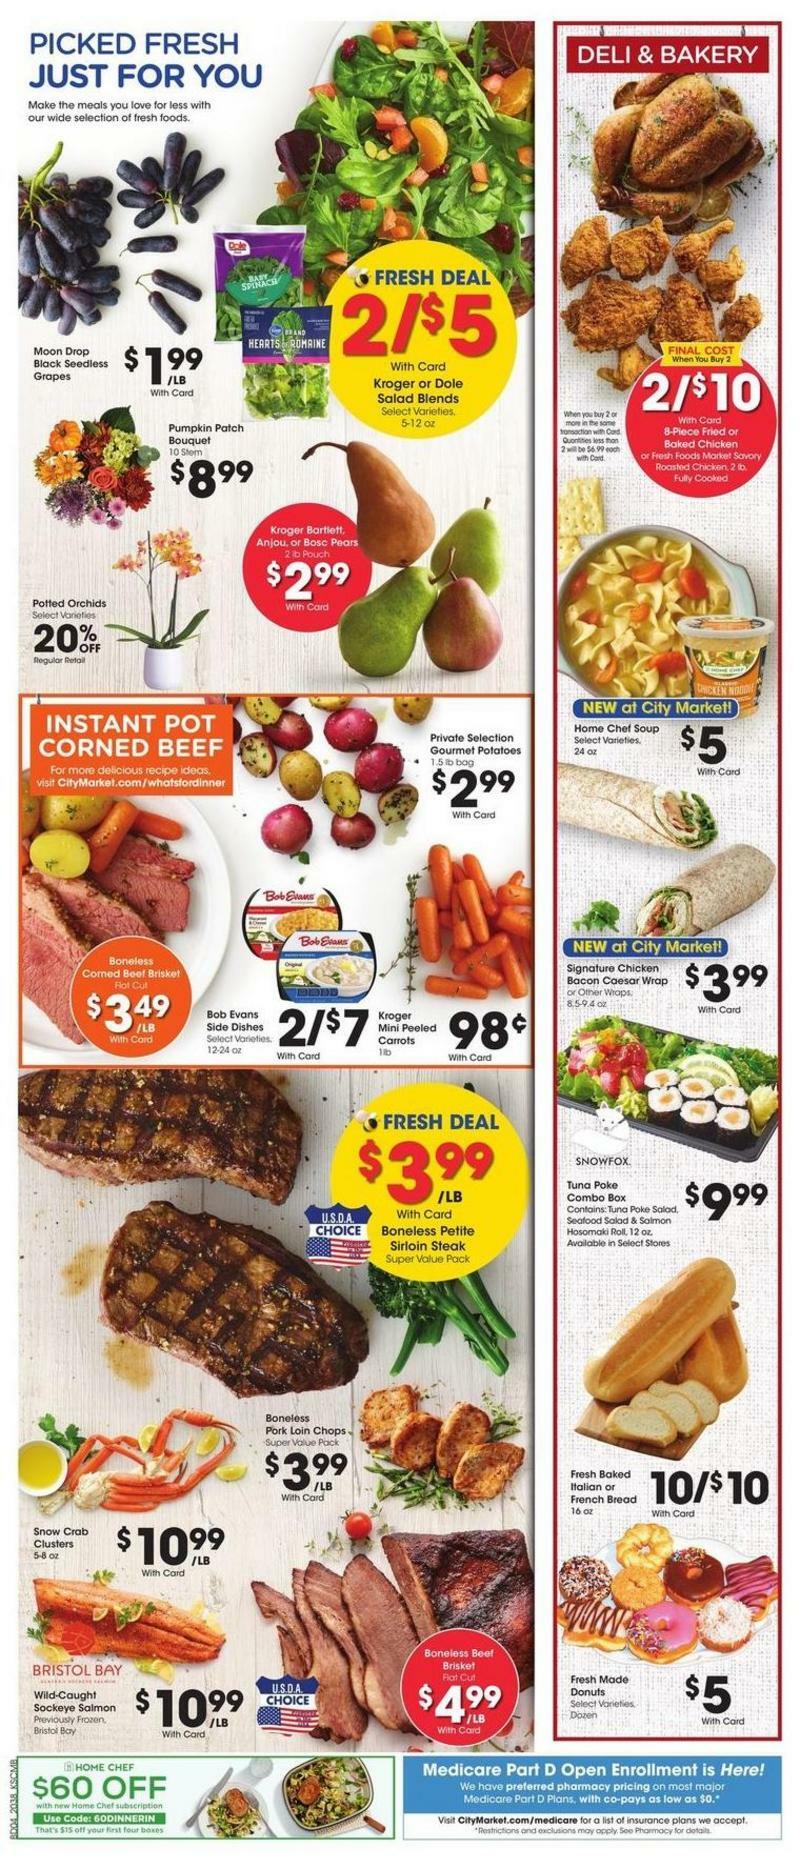 City Market Weekly Ad from October 21